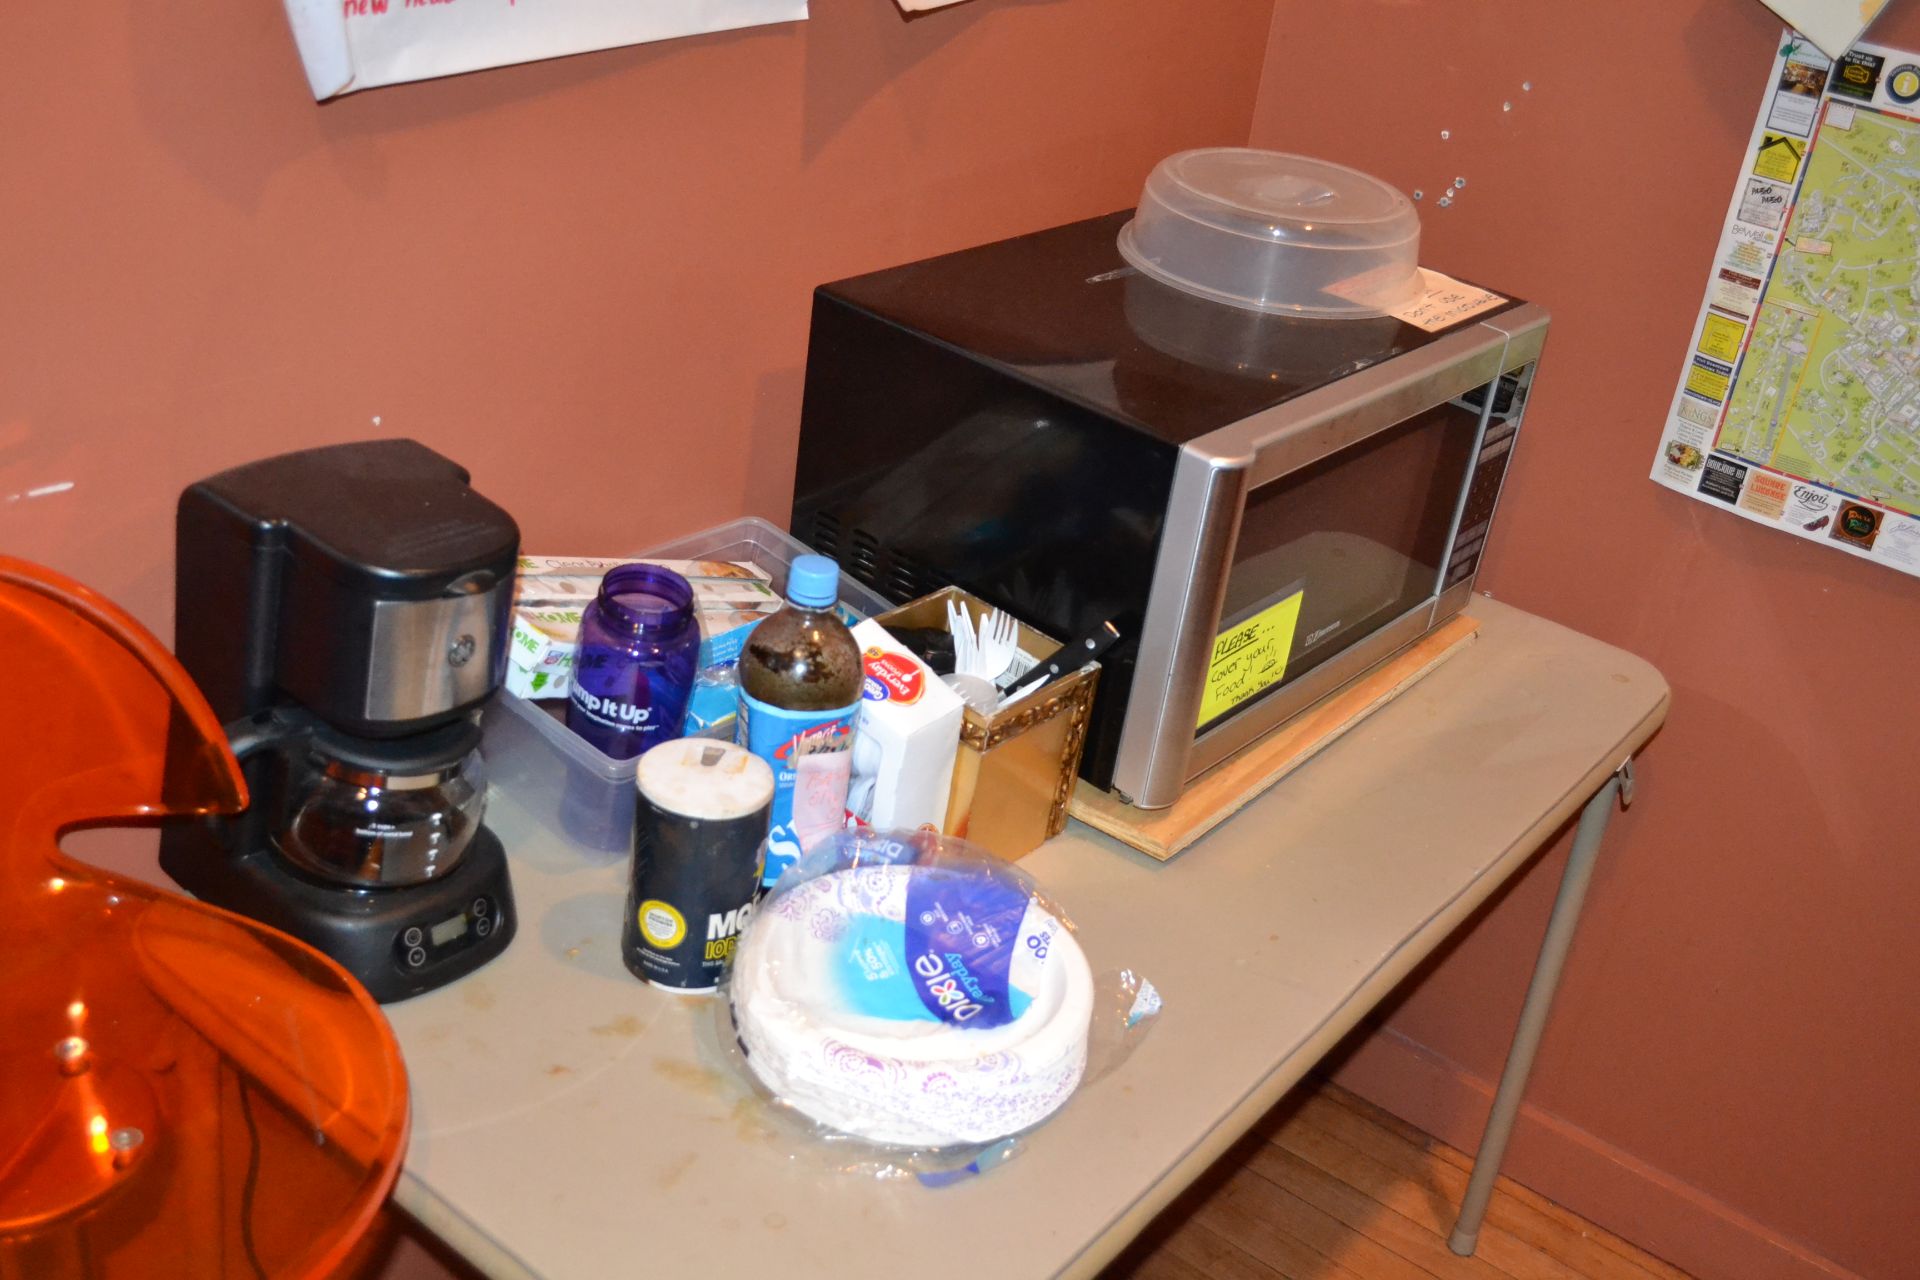 Contents of Breakroom: Fridge, Countertop, Table, Chairs & microwave - Image 3 of 4